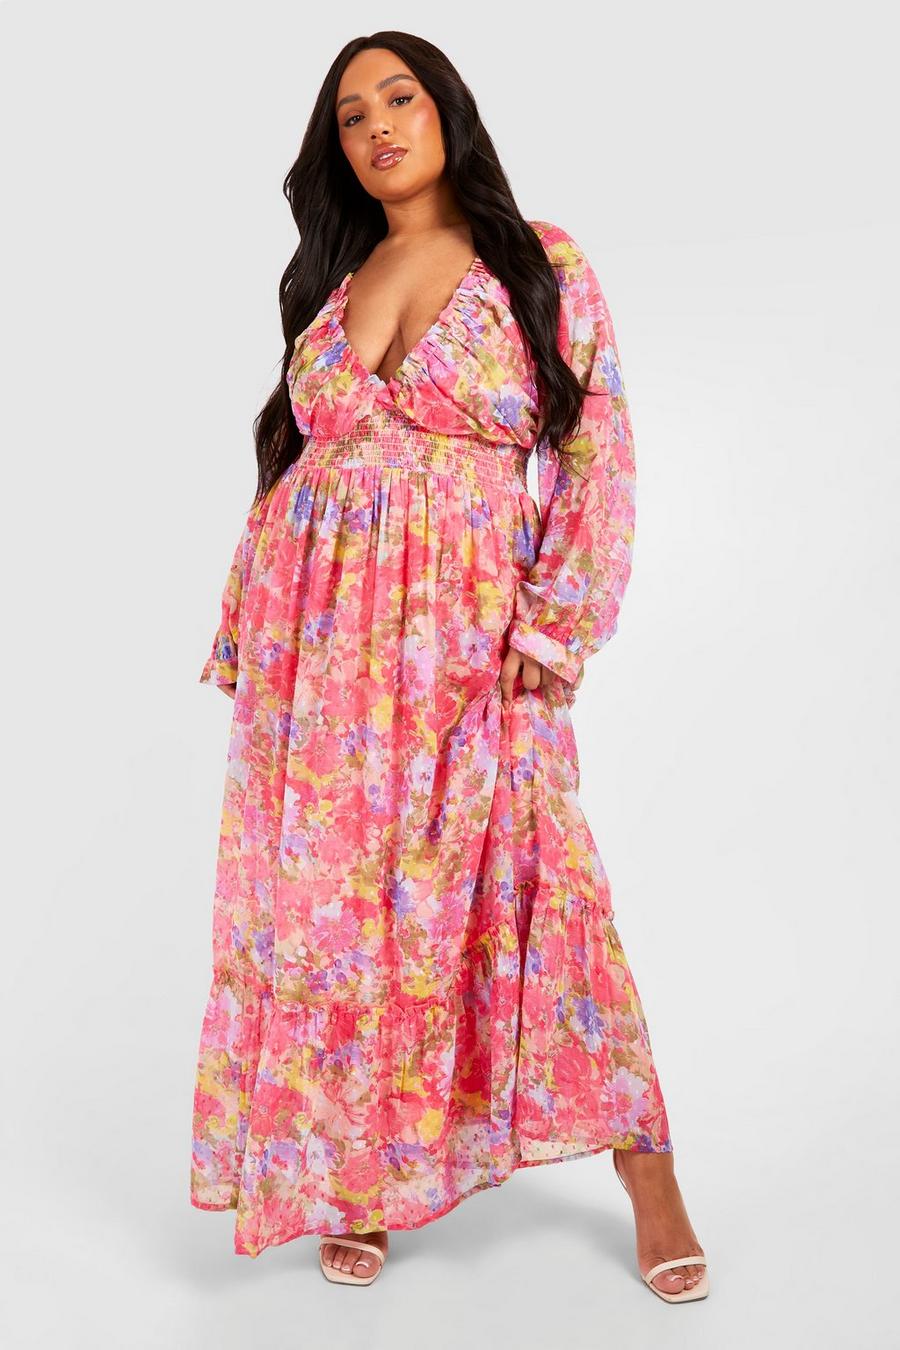 Plus Size Occasion Wear | Plus Size Occasion Outfits | boohoo UK